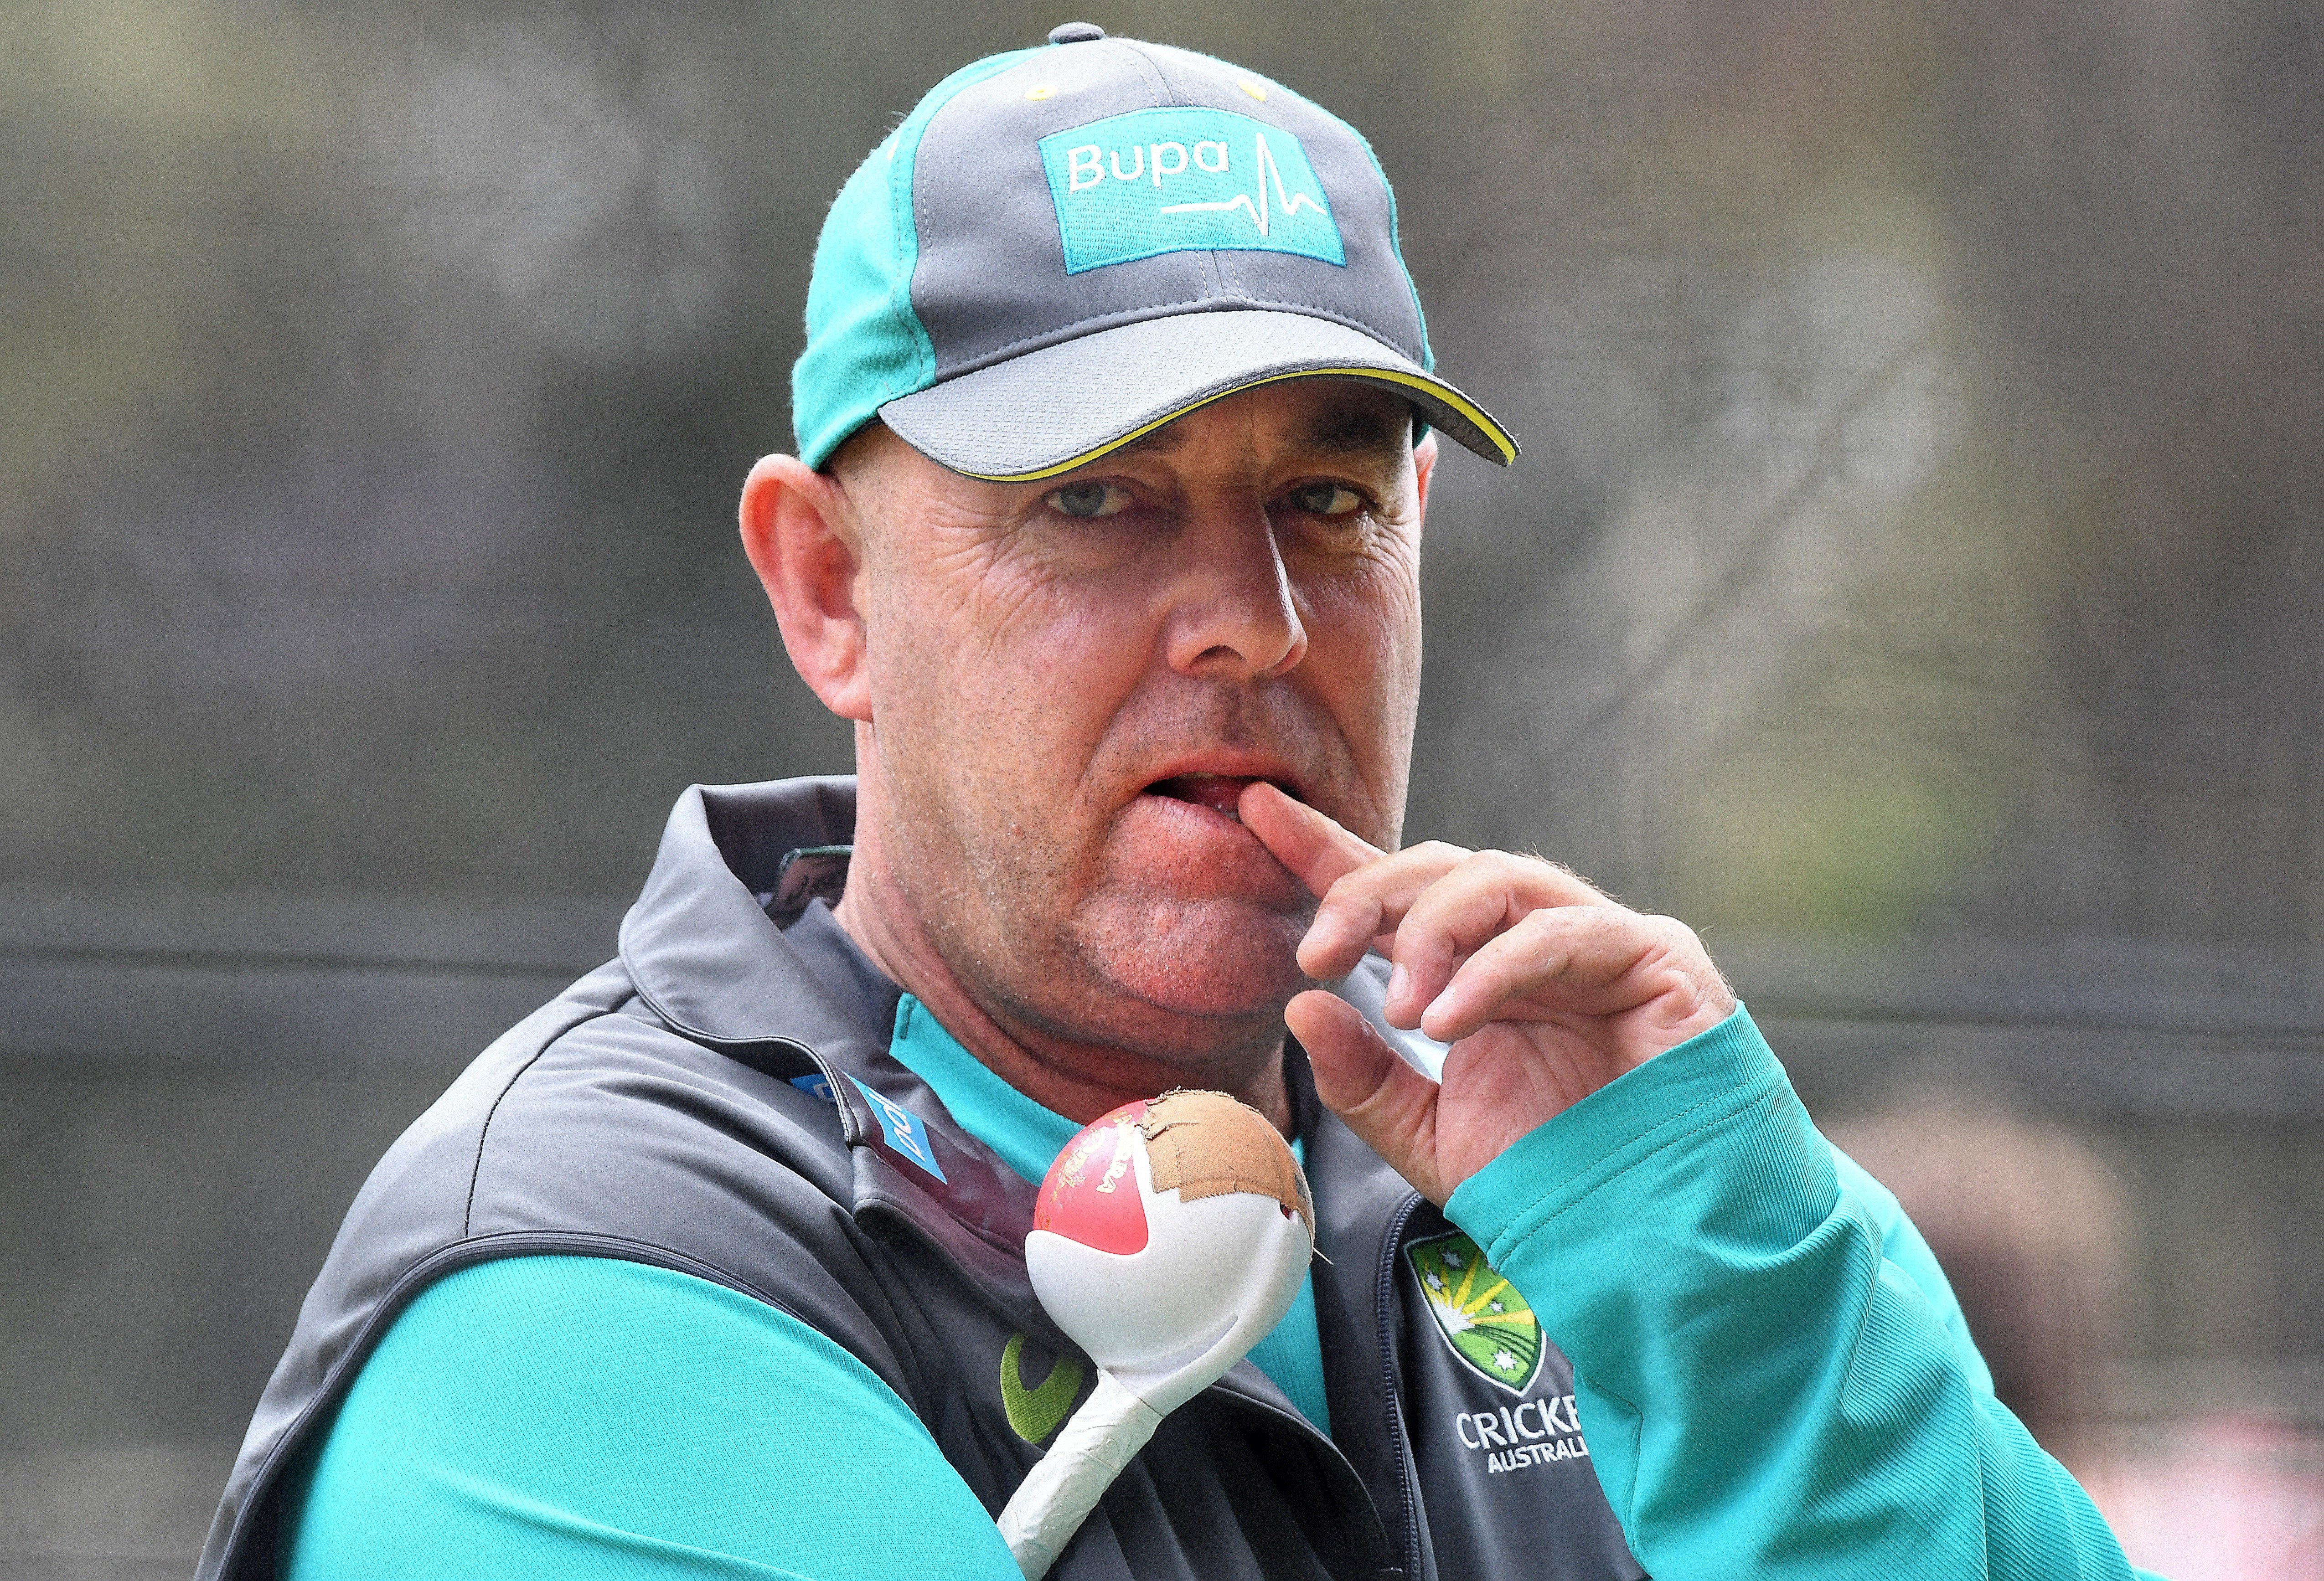 Australia coach Darren Lehmann looks on during a training session at the Adelaide Oval. He believes there is an alcohol issue in the England squad. Photo: EPA